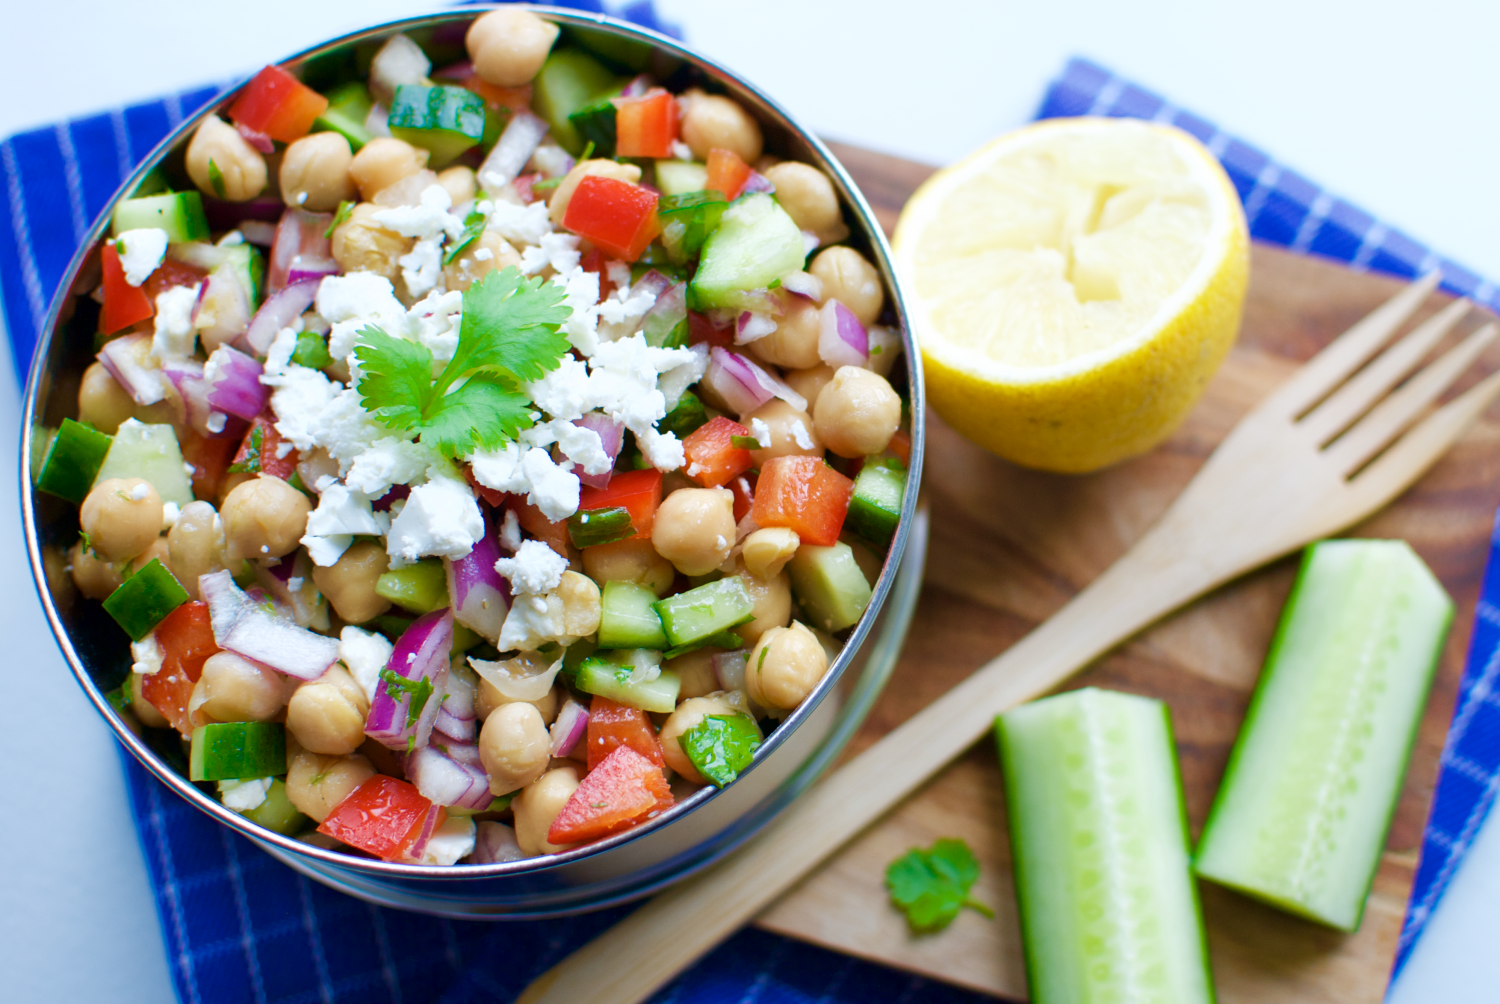 Delicious and protein-rich chickpea salad - perfect for foodprepping!